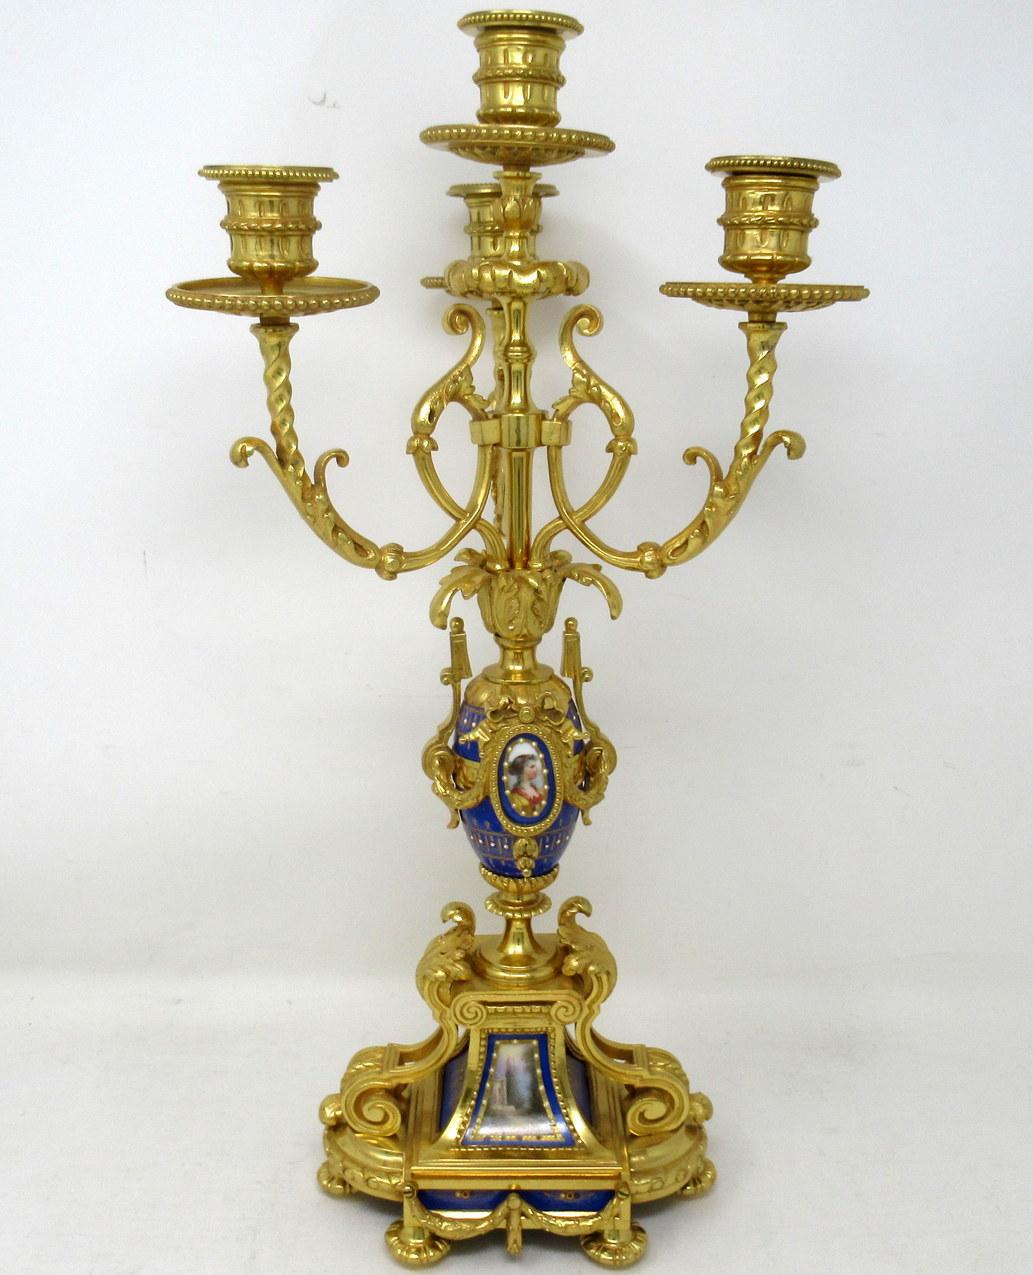 A fine stylish and imposing French four light table or mantle sevres porcelain mounted ormolu candelabra of outstanding quality. Early to Mid-Nineteenth Century. 

With three scrolling leaf capped and one central branch above a porcelain urn. Each